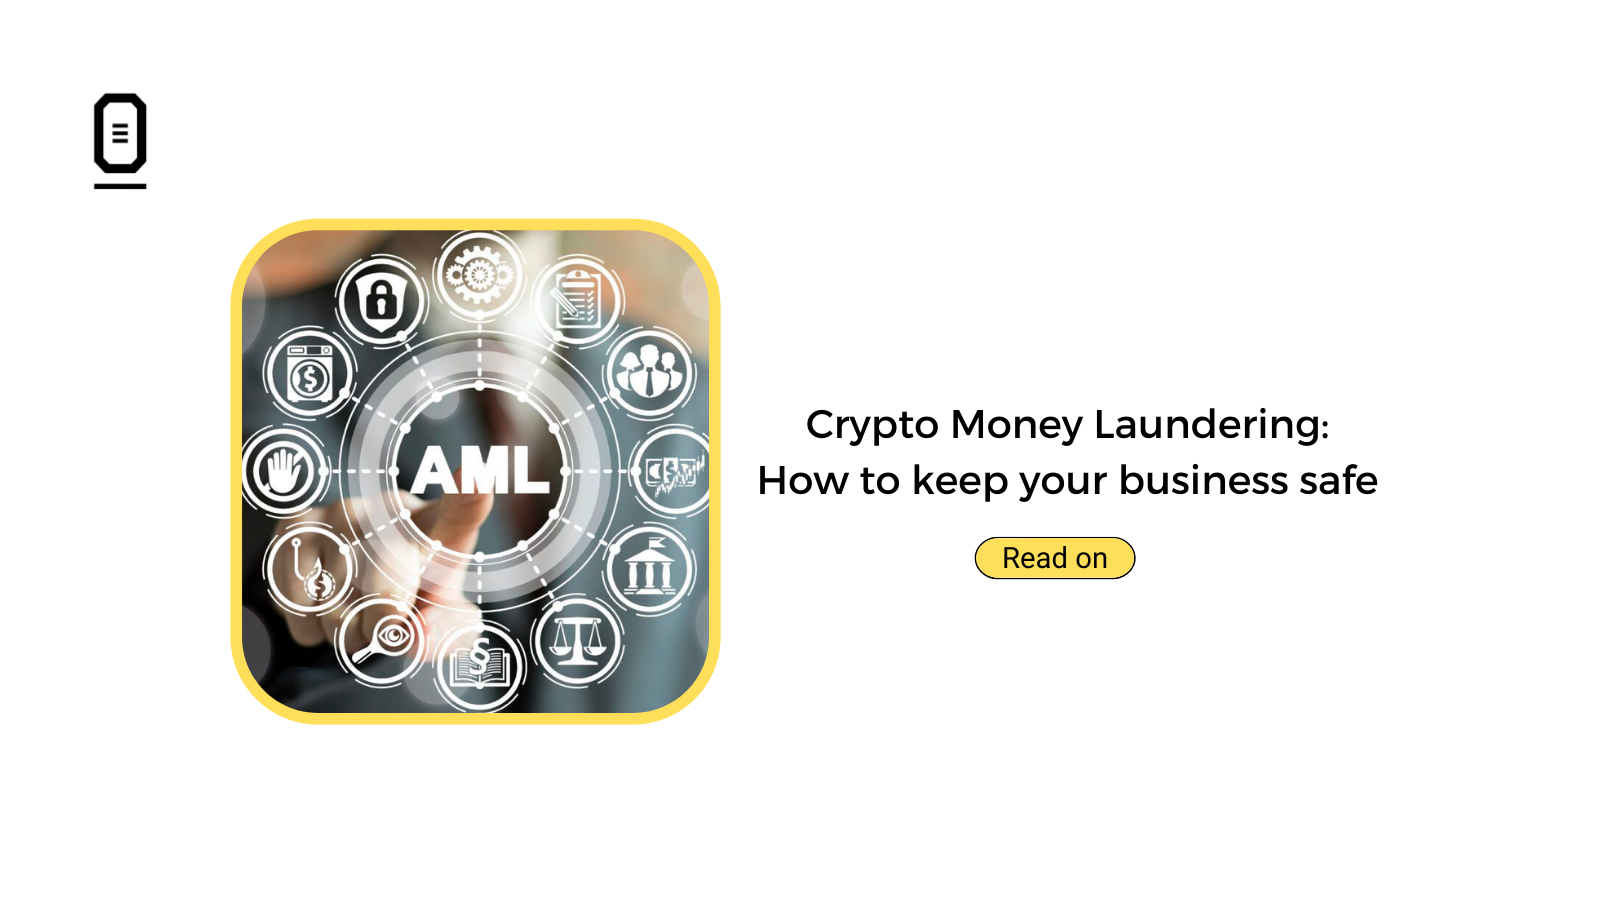 Crypto Money Laundering: How to Keep your business safe